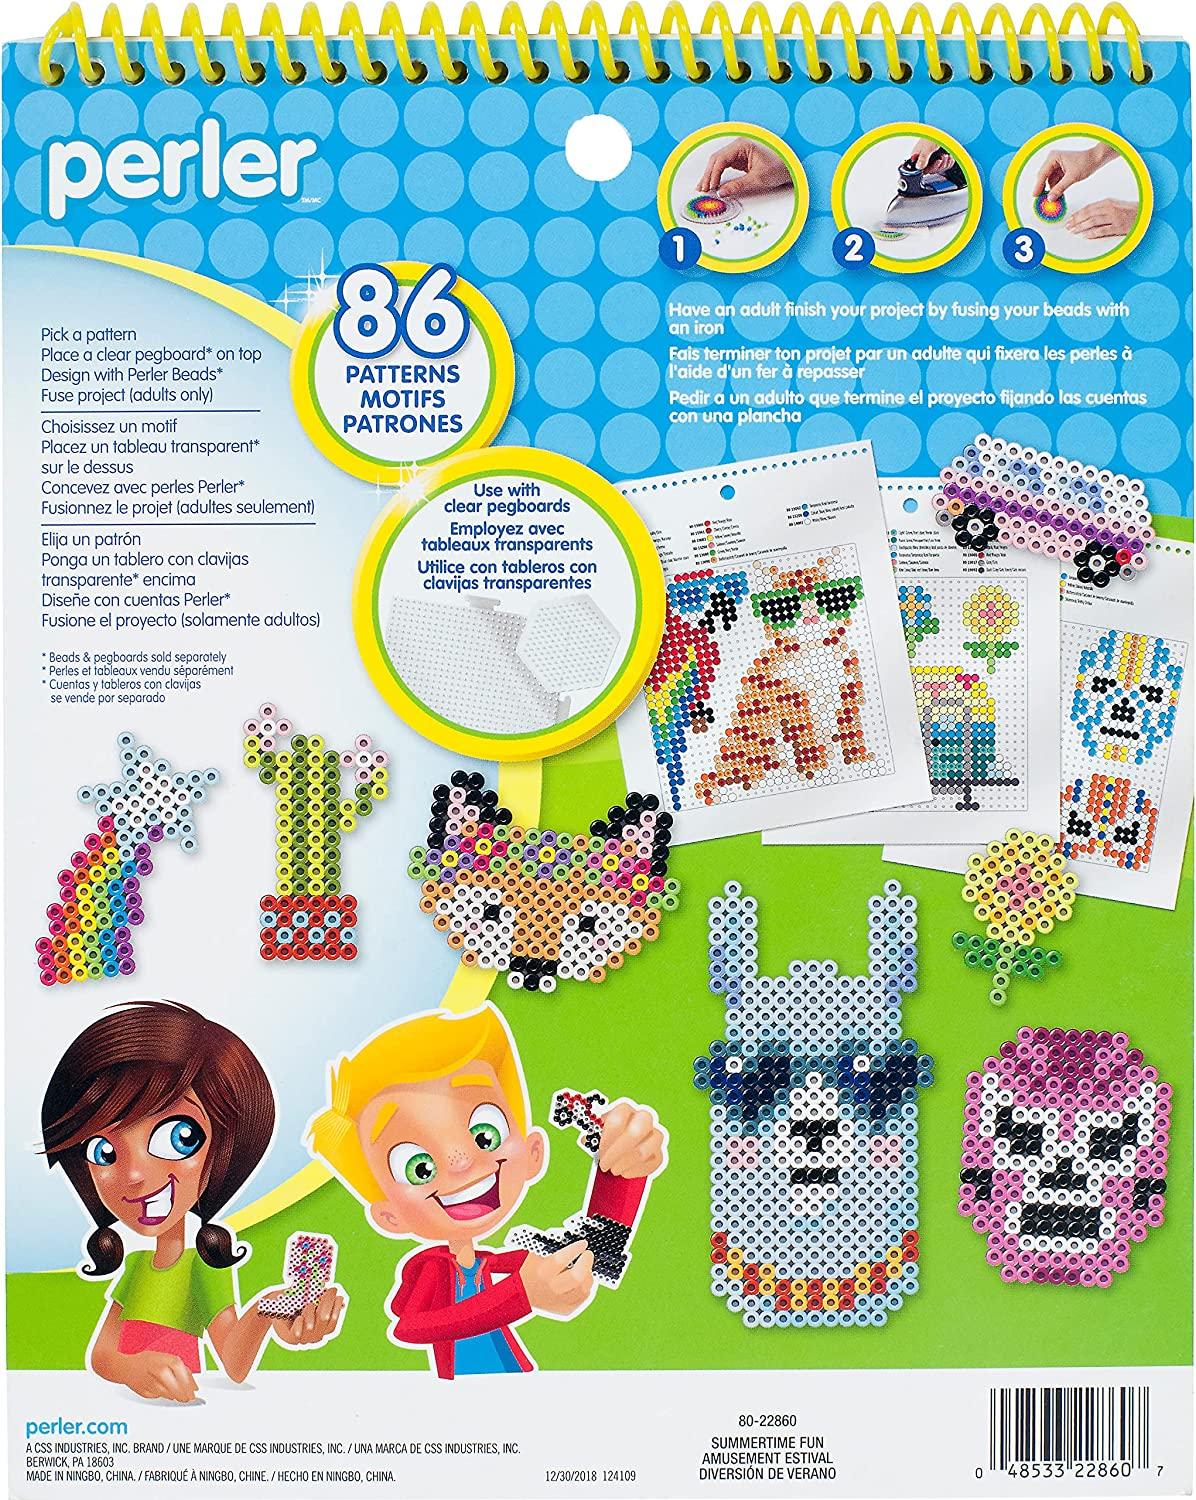 Pegboards for Perler Beads, 5000 Pieces Fuse Beads Kits Including